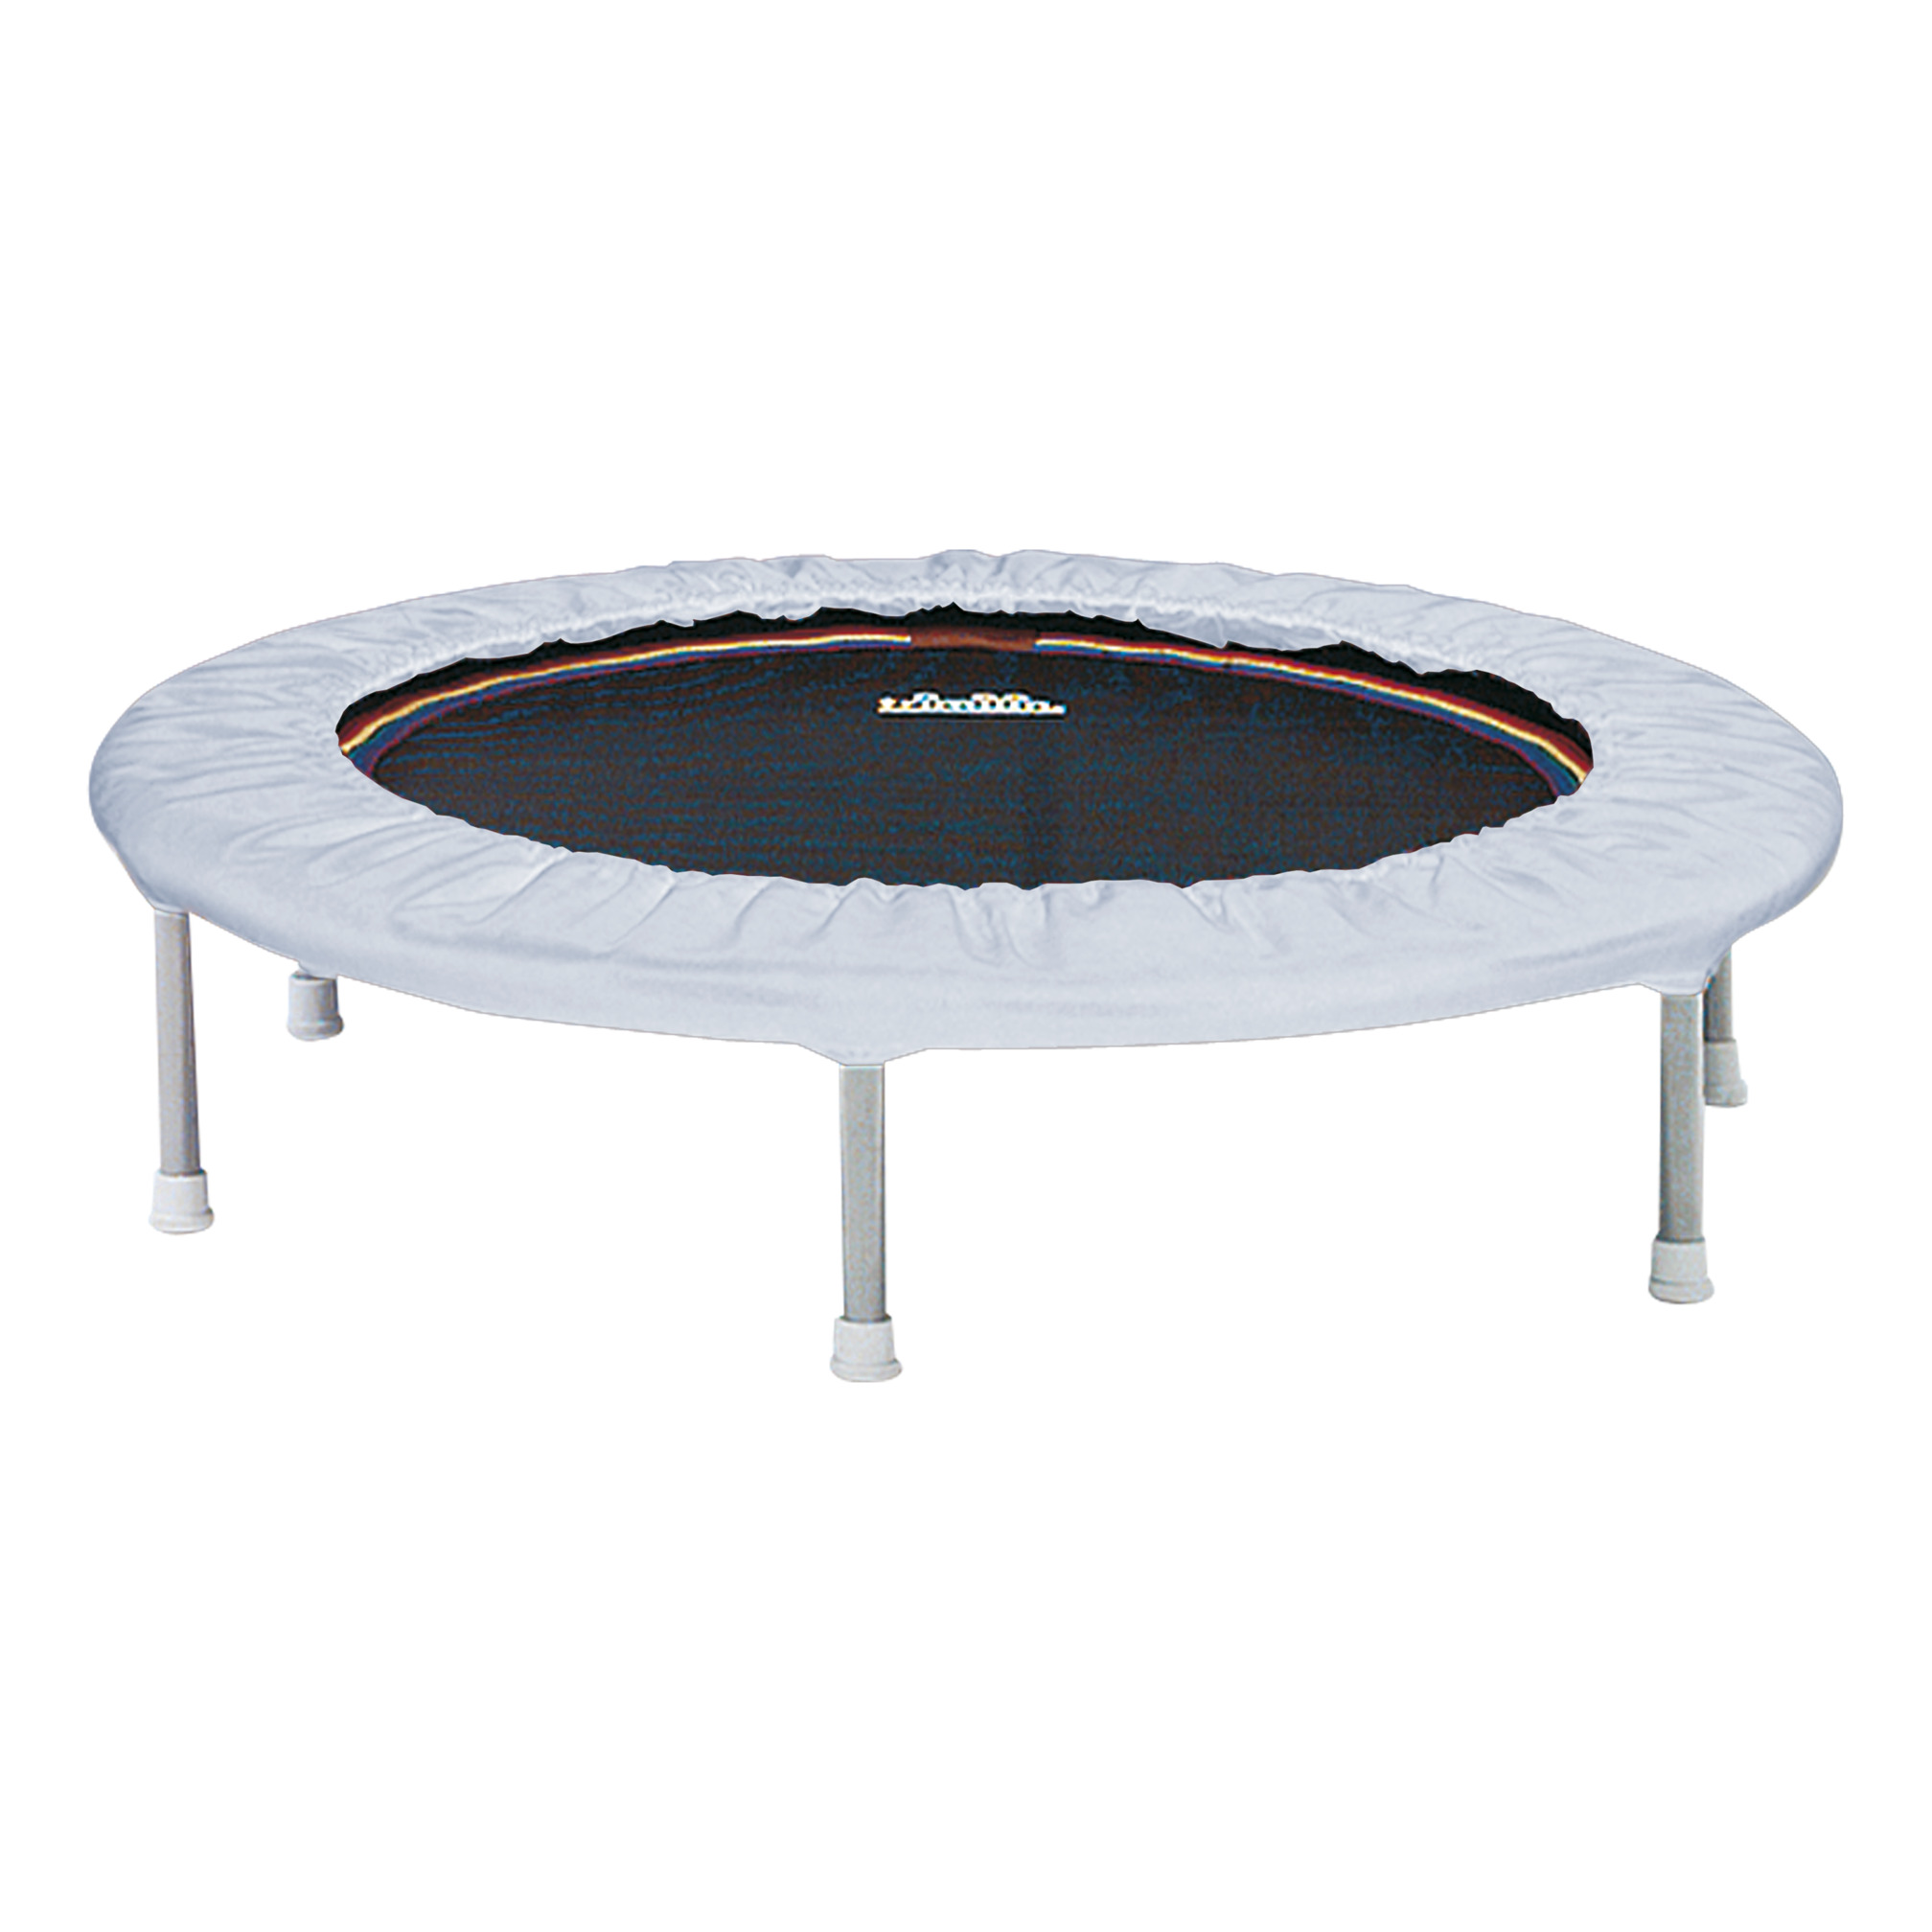 Fit-Jump Med trampoline, collapsible legs